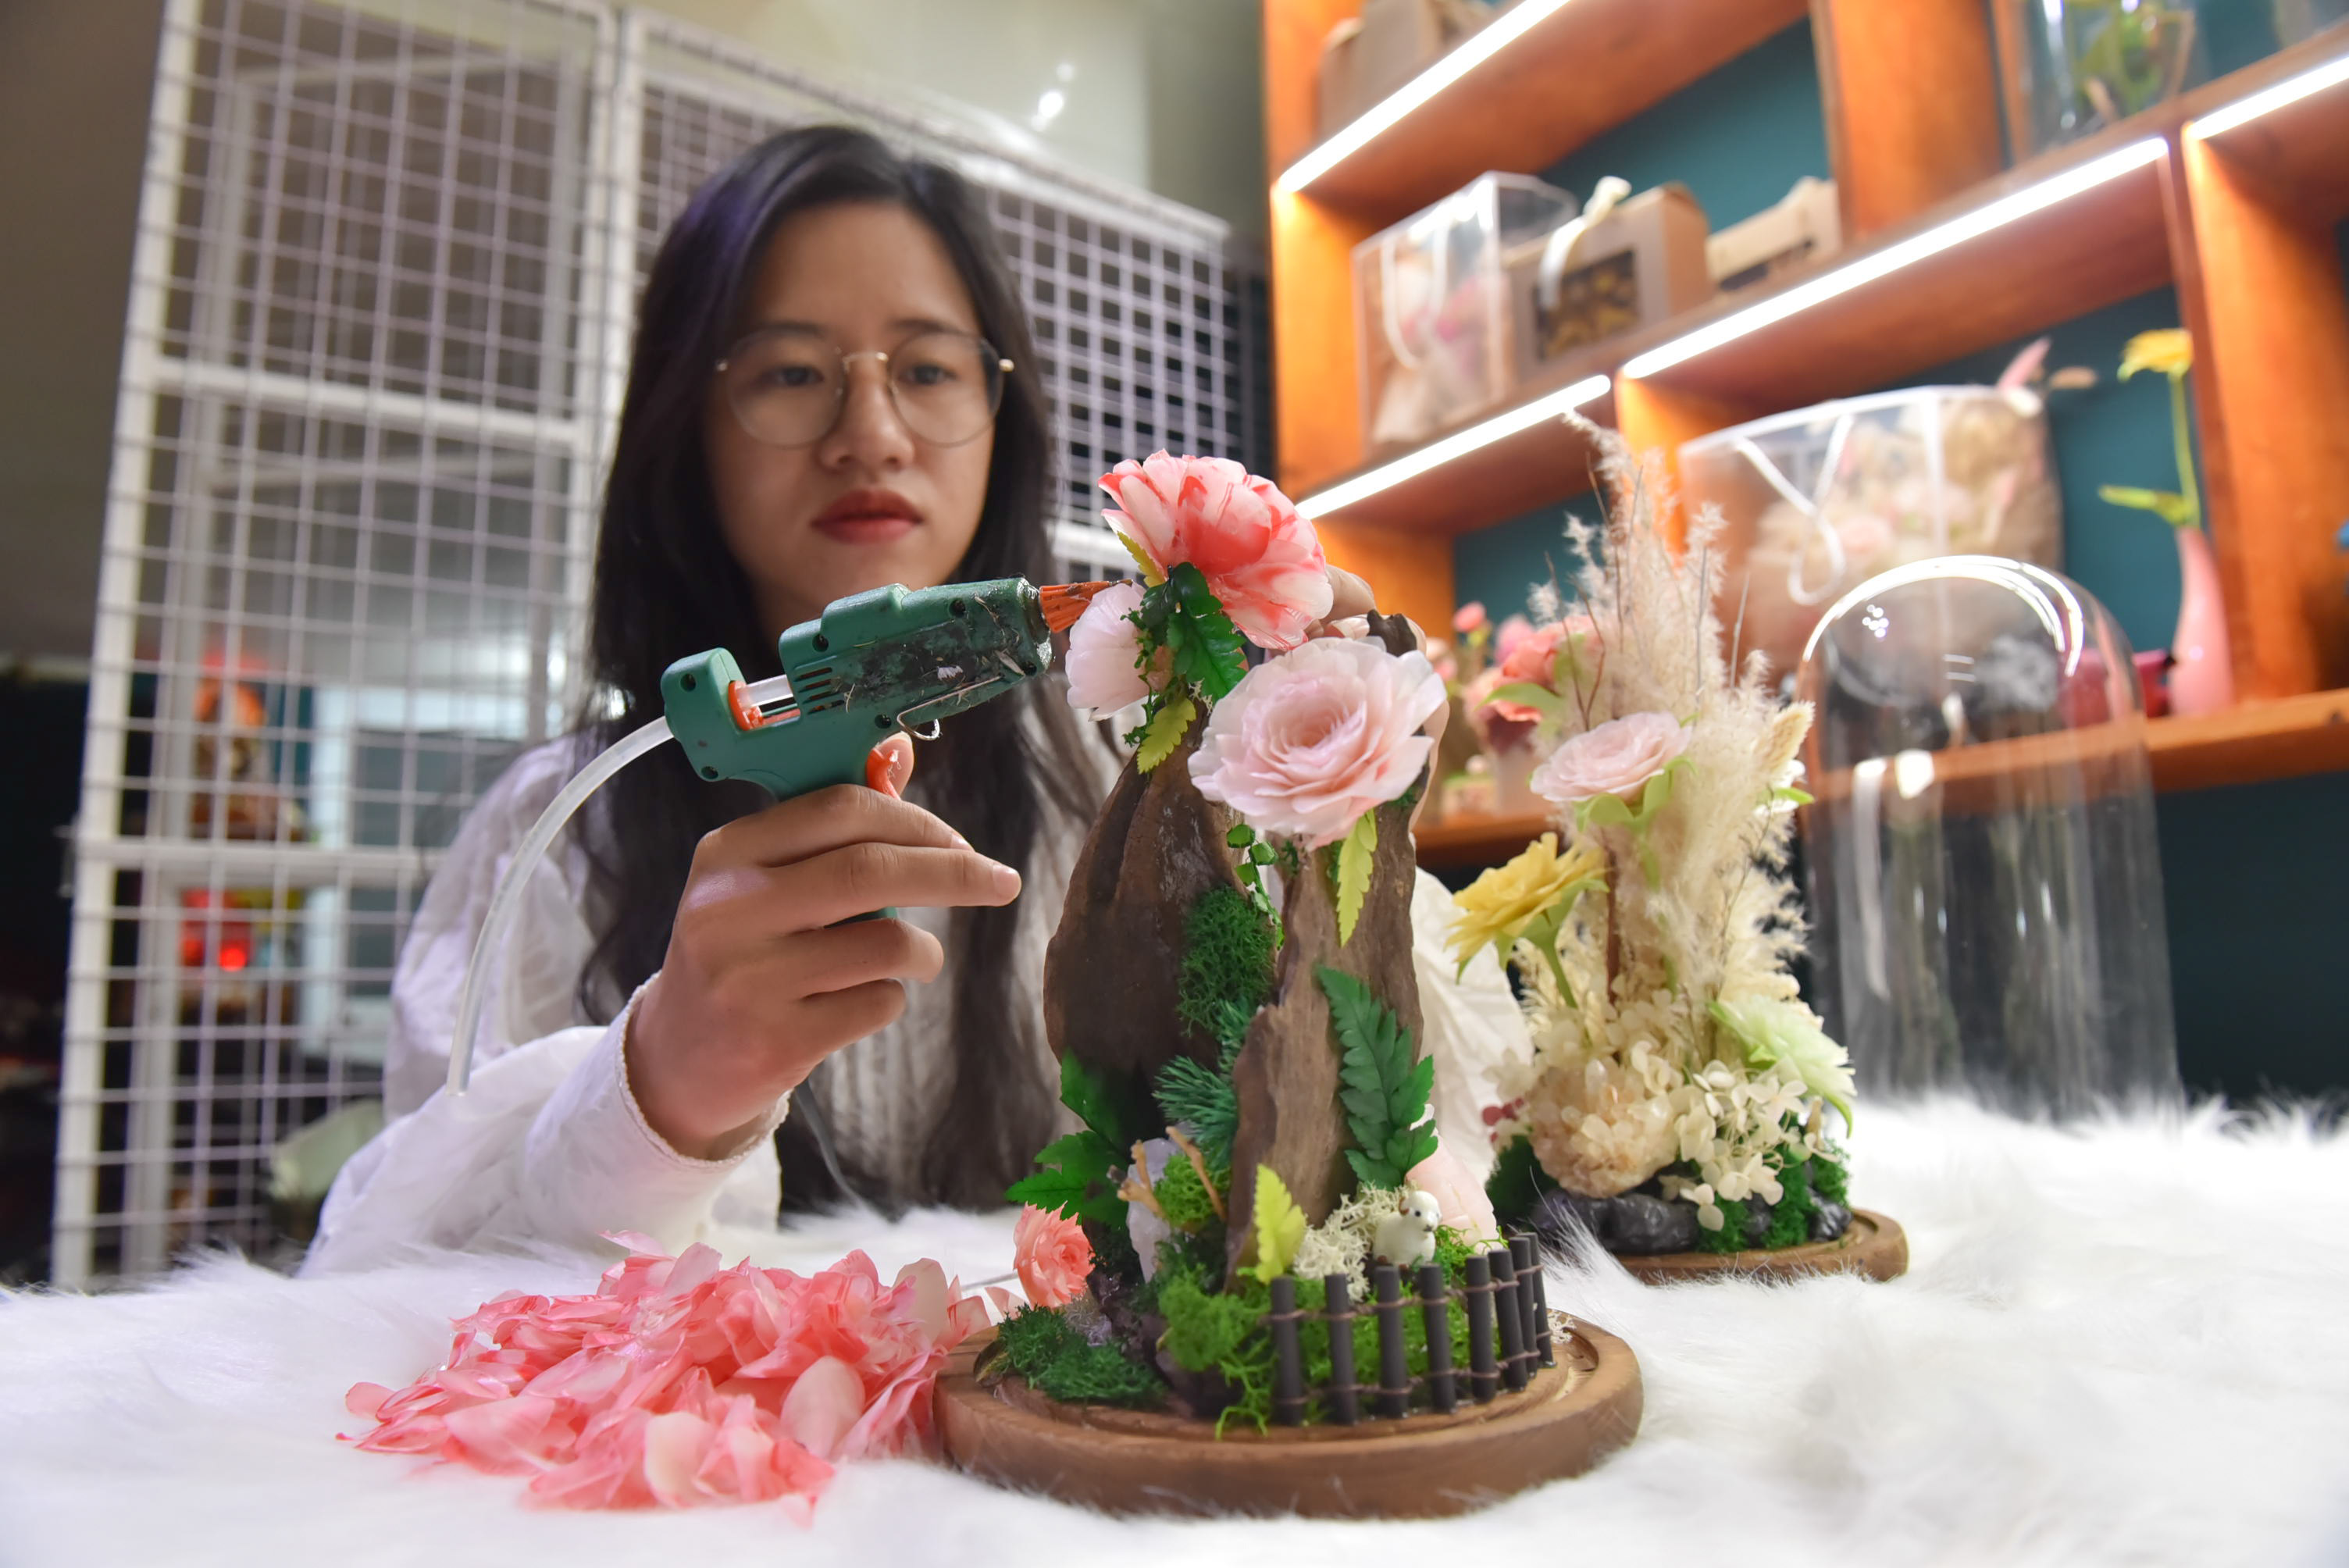 Pham Nhu Quynh works on a product made from fish scales and other material. Photo: Ngoc Phuong / Tuoi Tre New